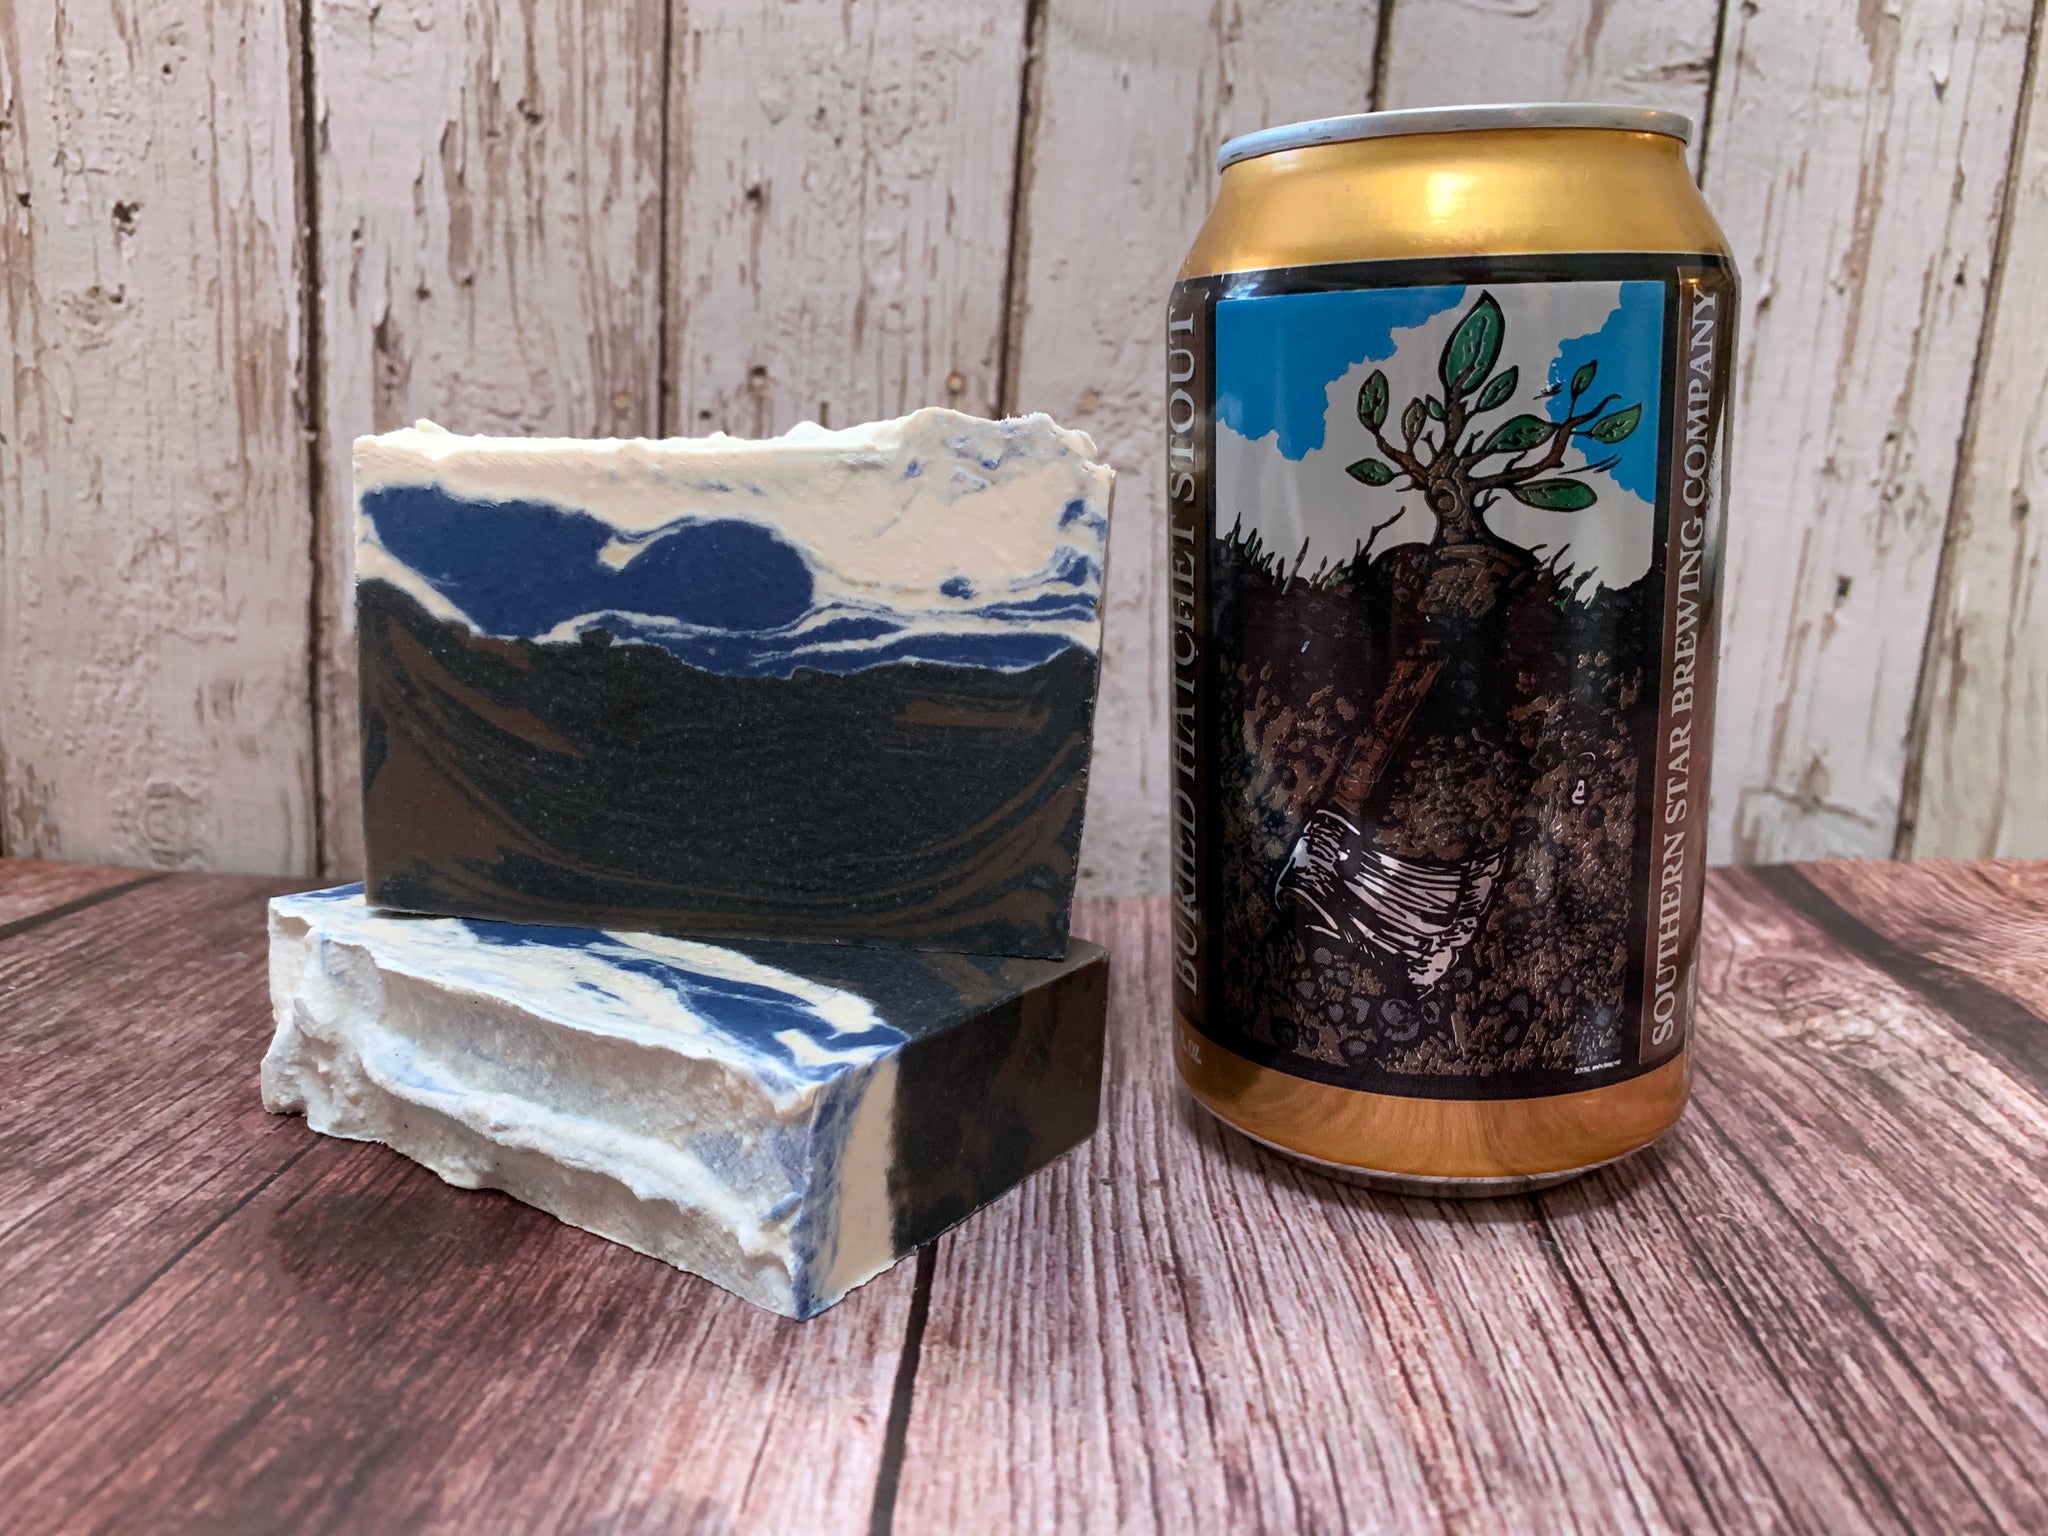 craft beer soap for him with activated charcoal made with buried hatchet stout craft beer from southern star brewing company conroe texas craft brewery spunkndisorderly soaps 